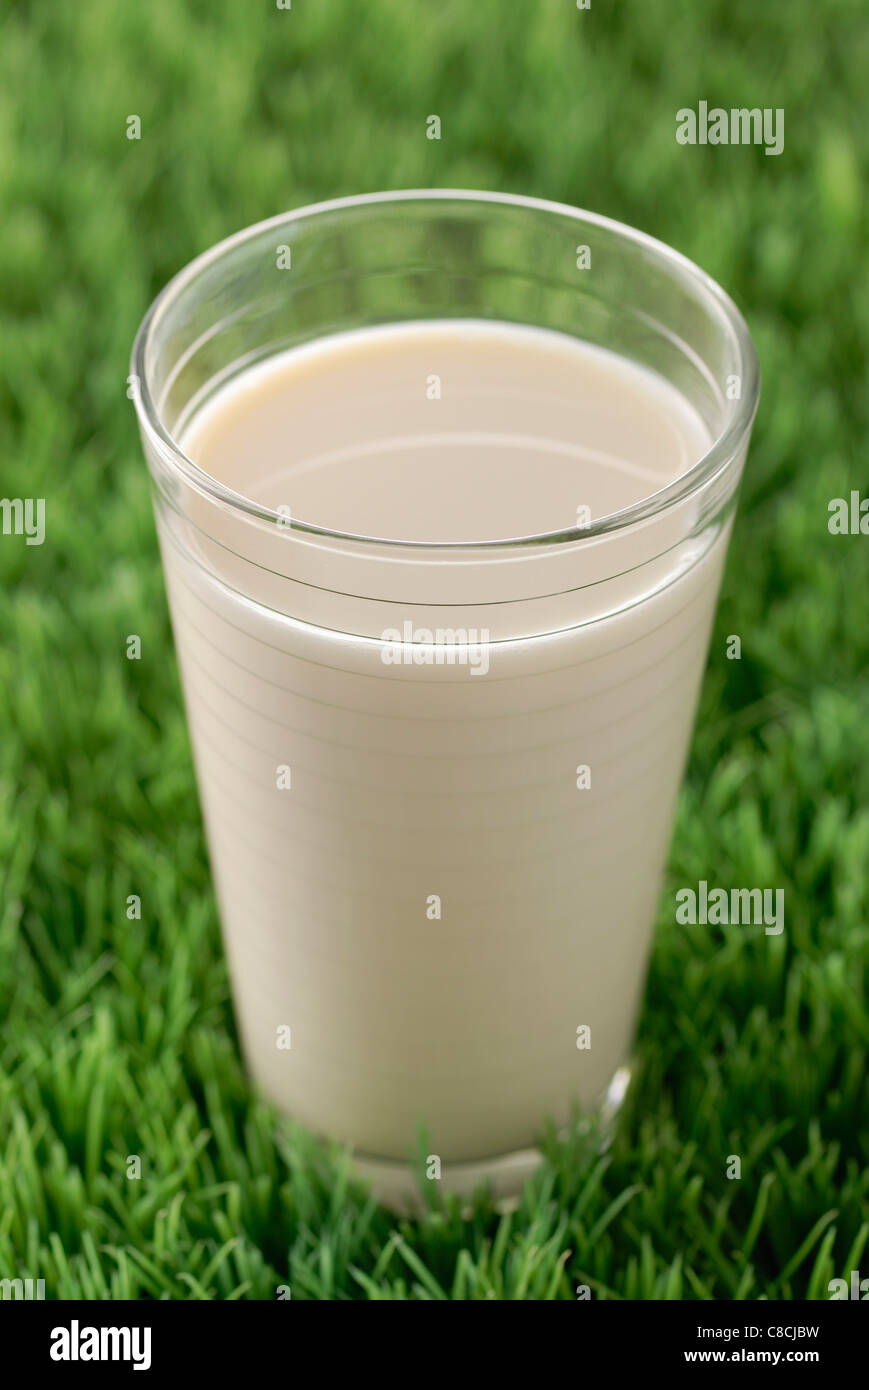 Glass of milk in the grass Stock Photo